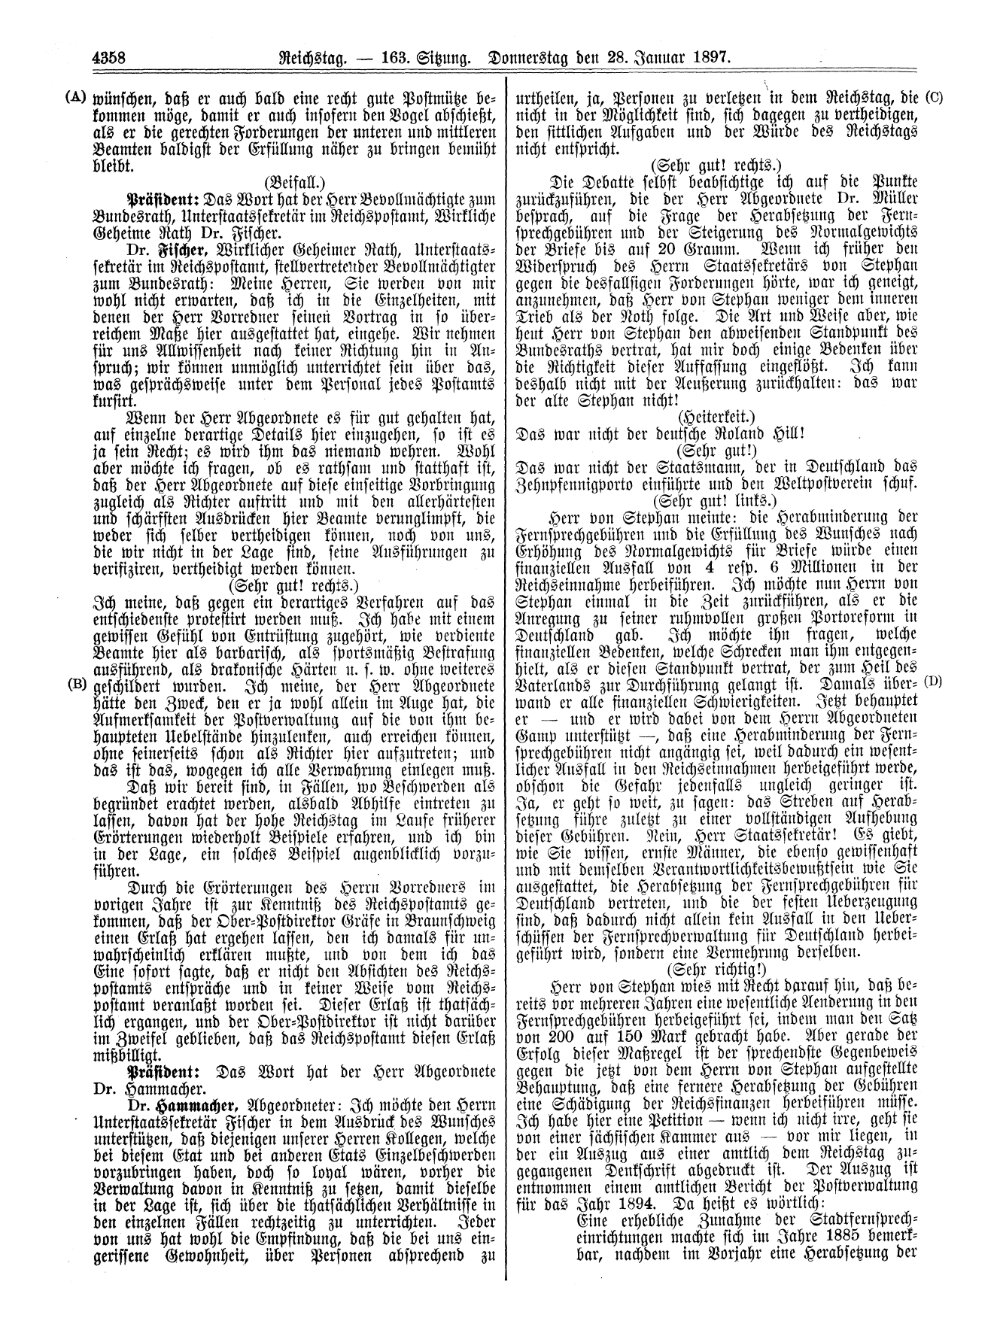 Scan of page 4358